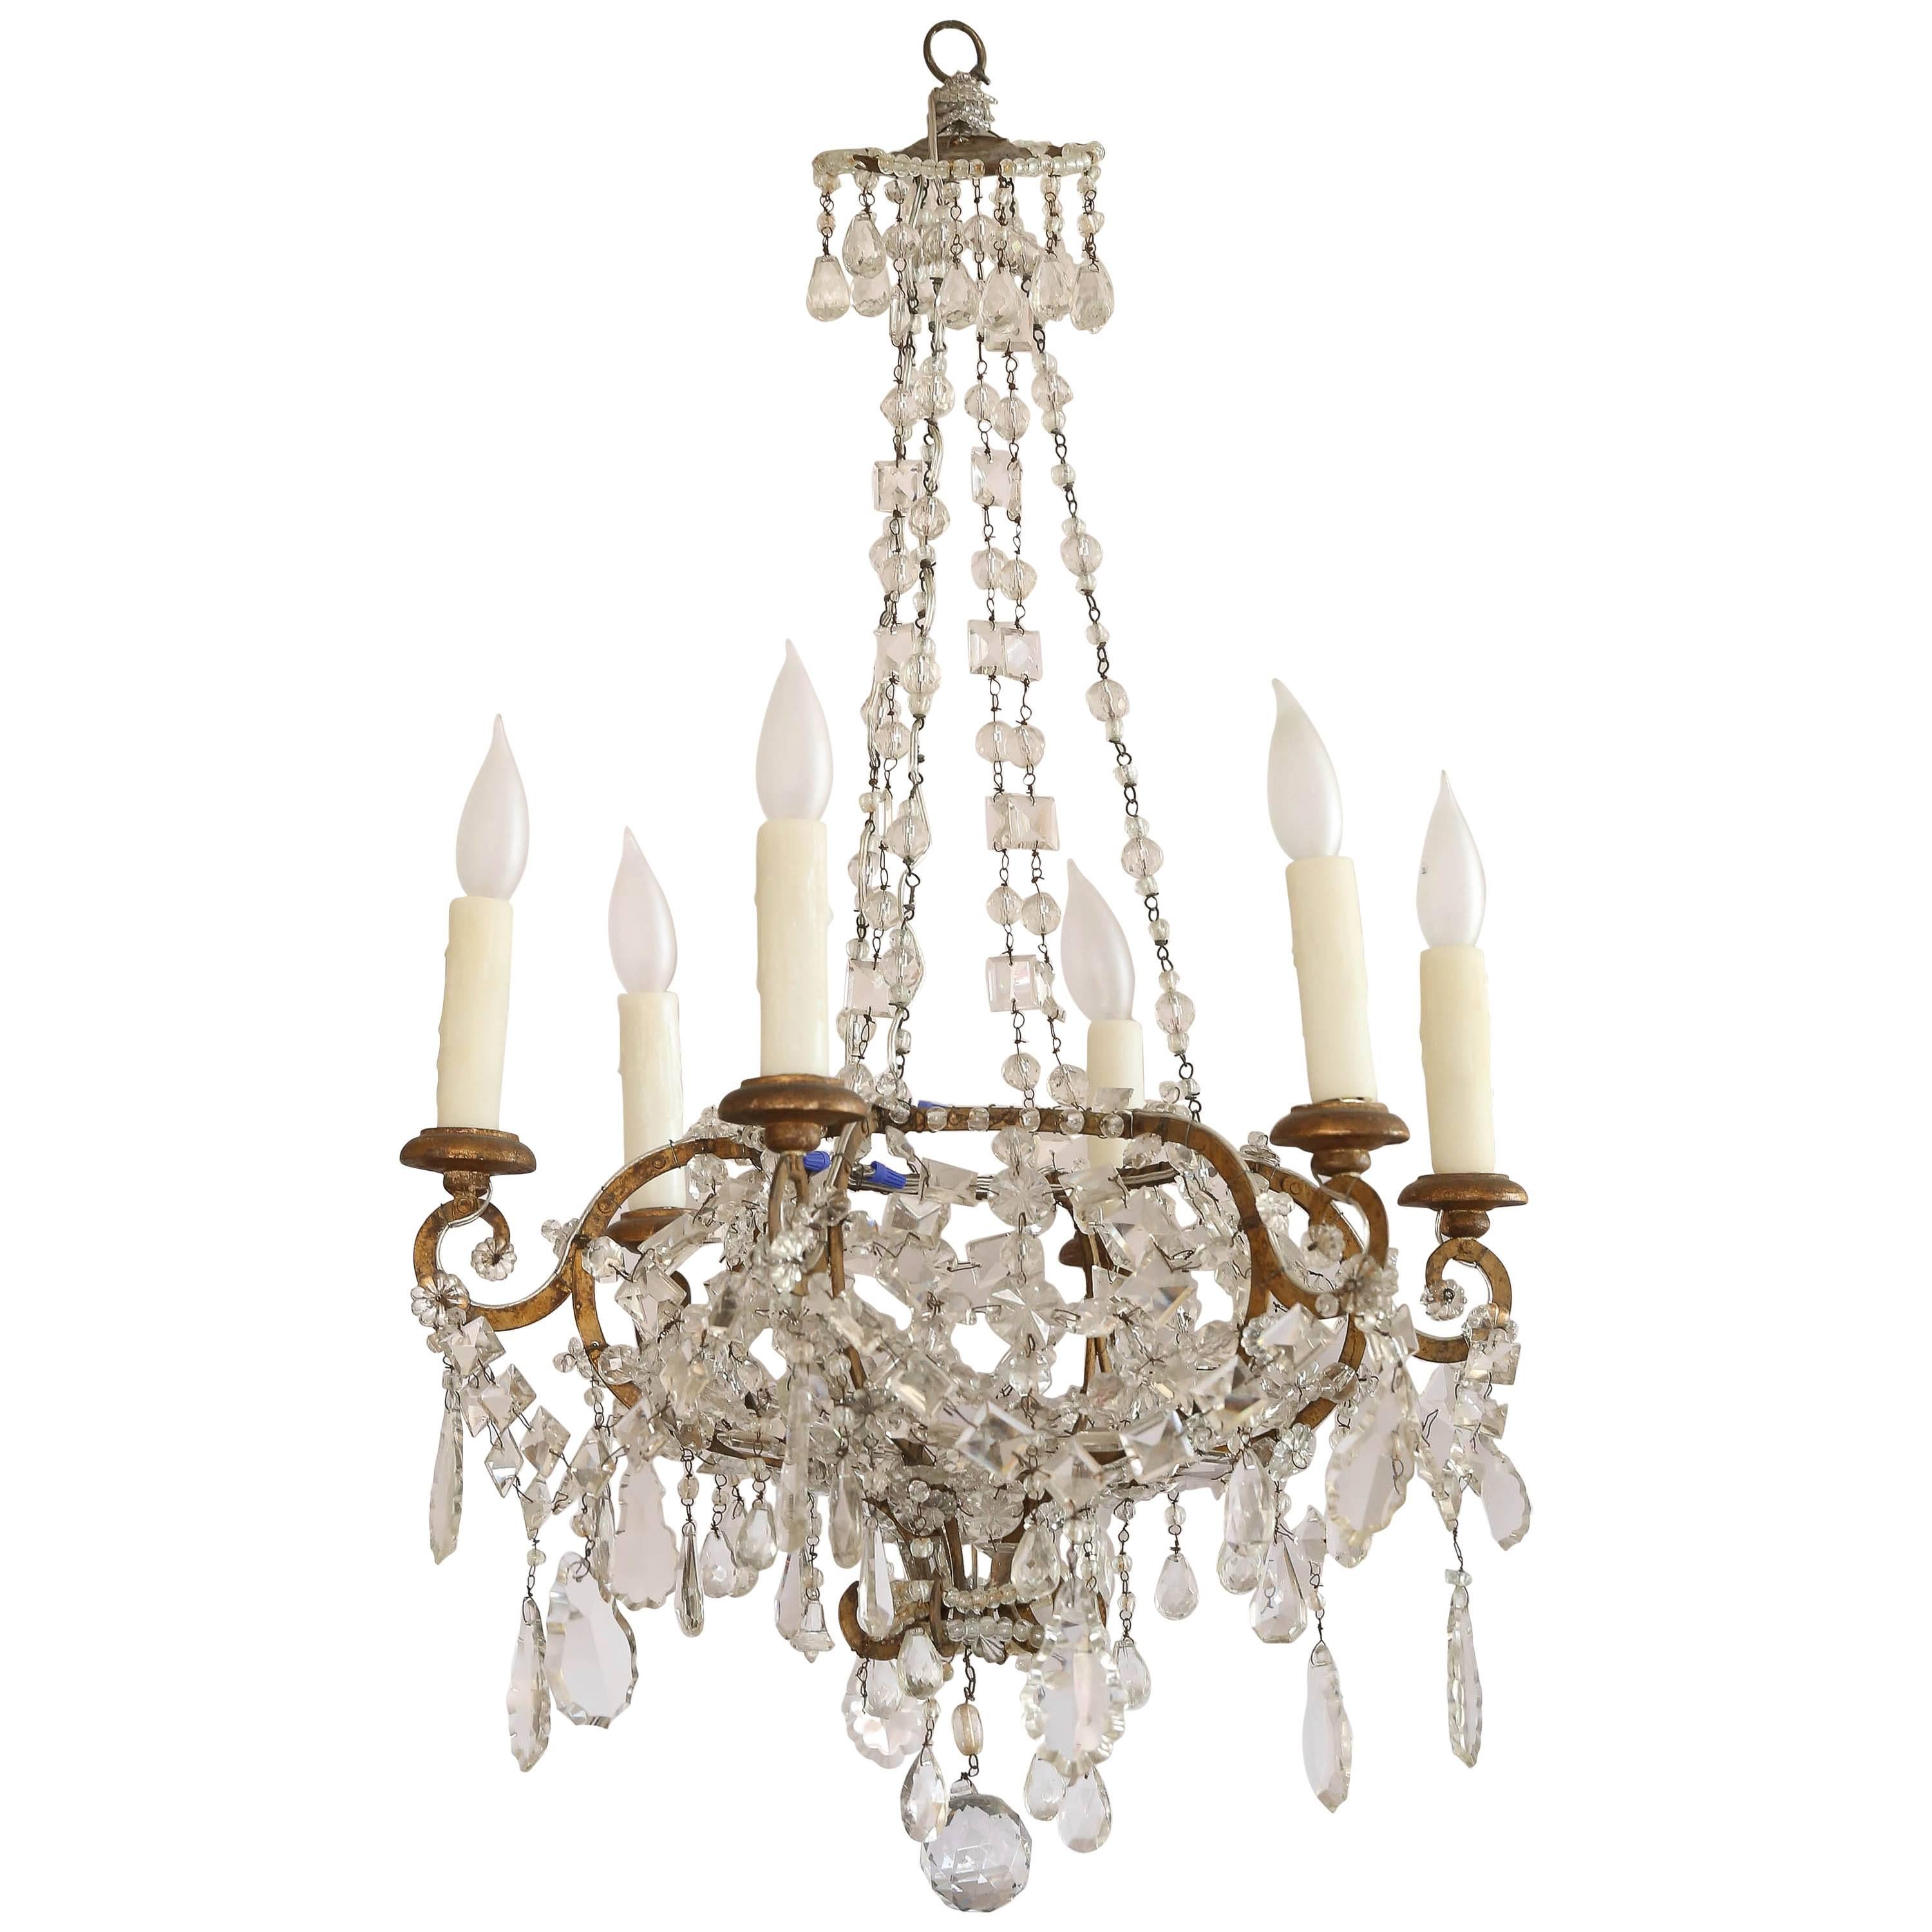 Italian Early 1900s Crystal Chandelier with Wood Gilt Candle Light Holders